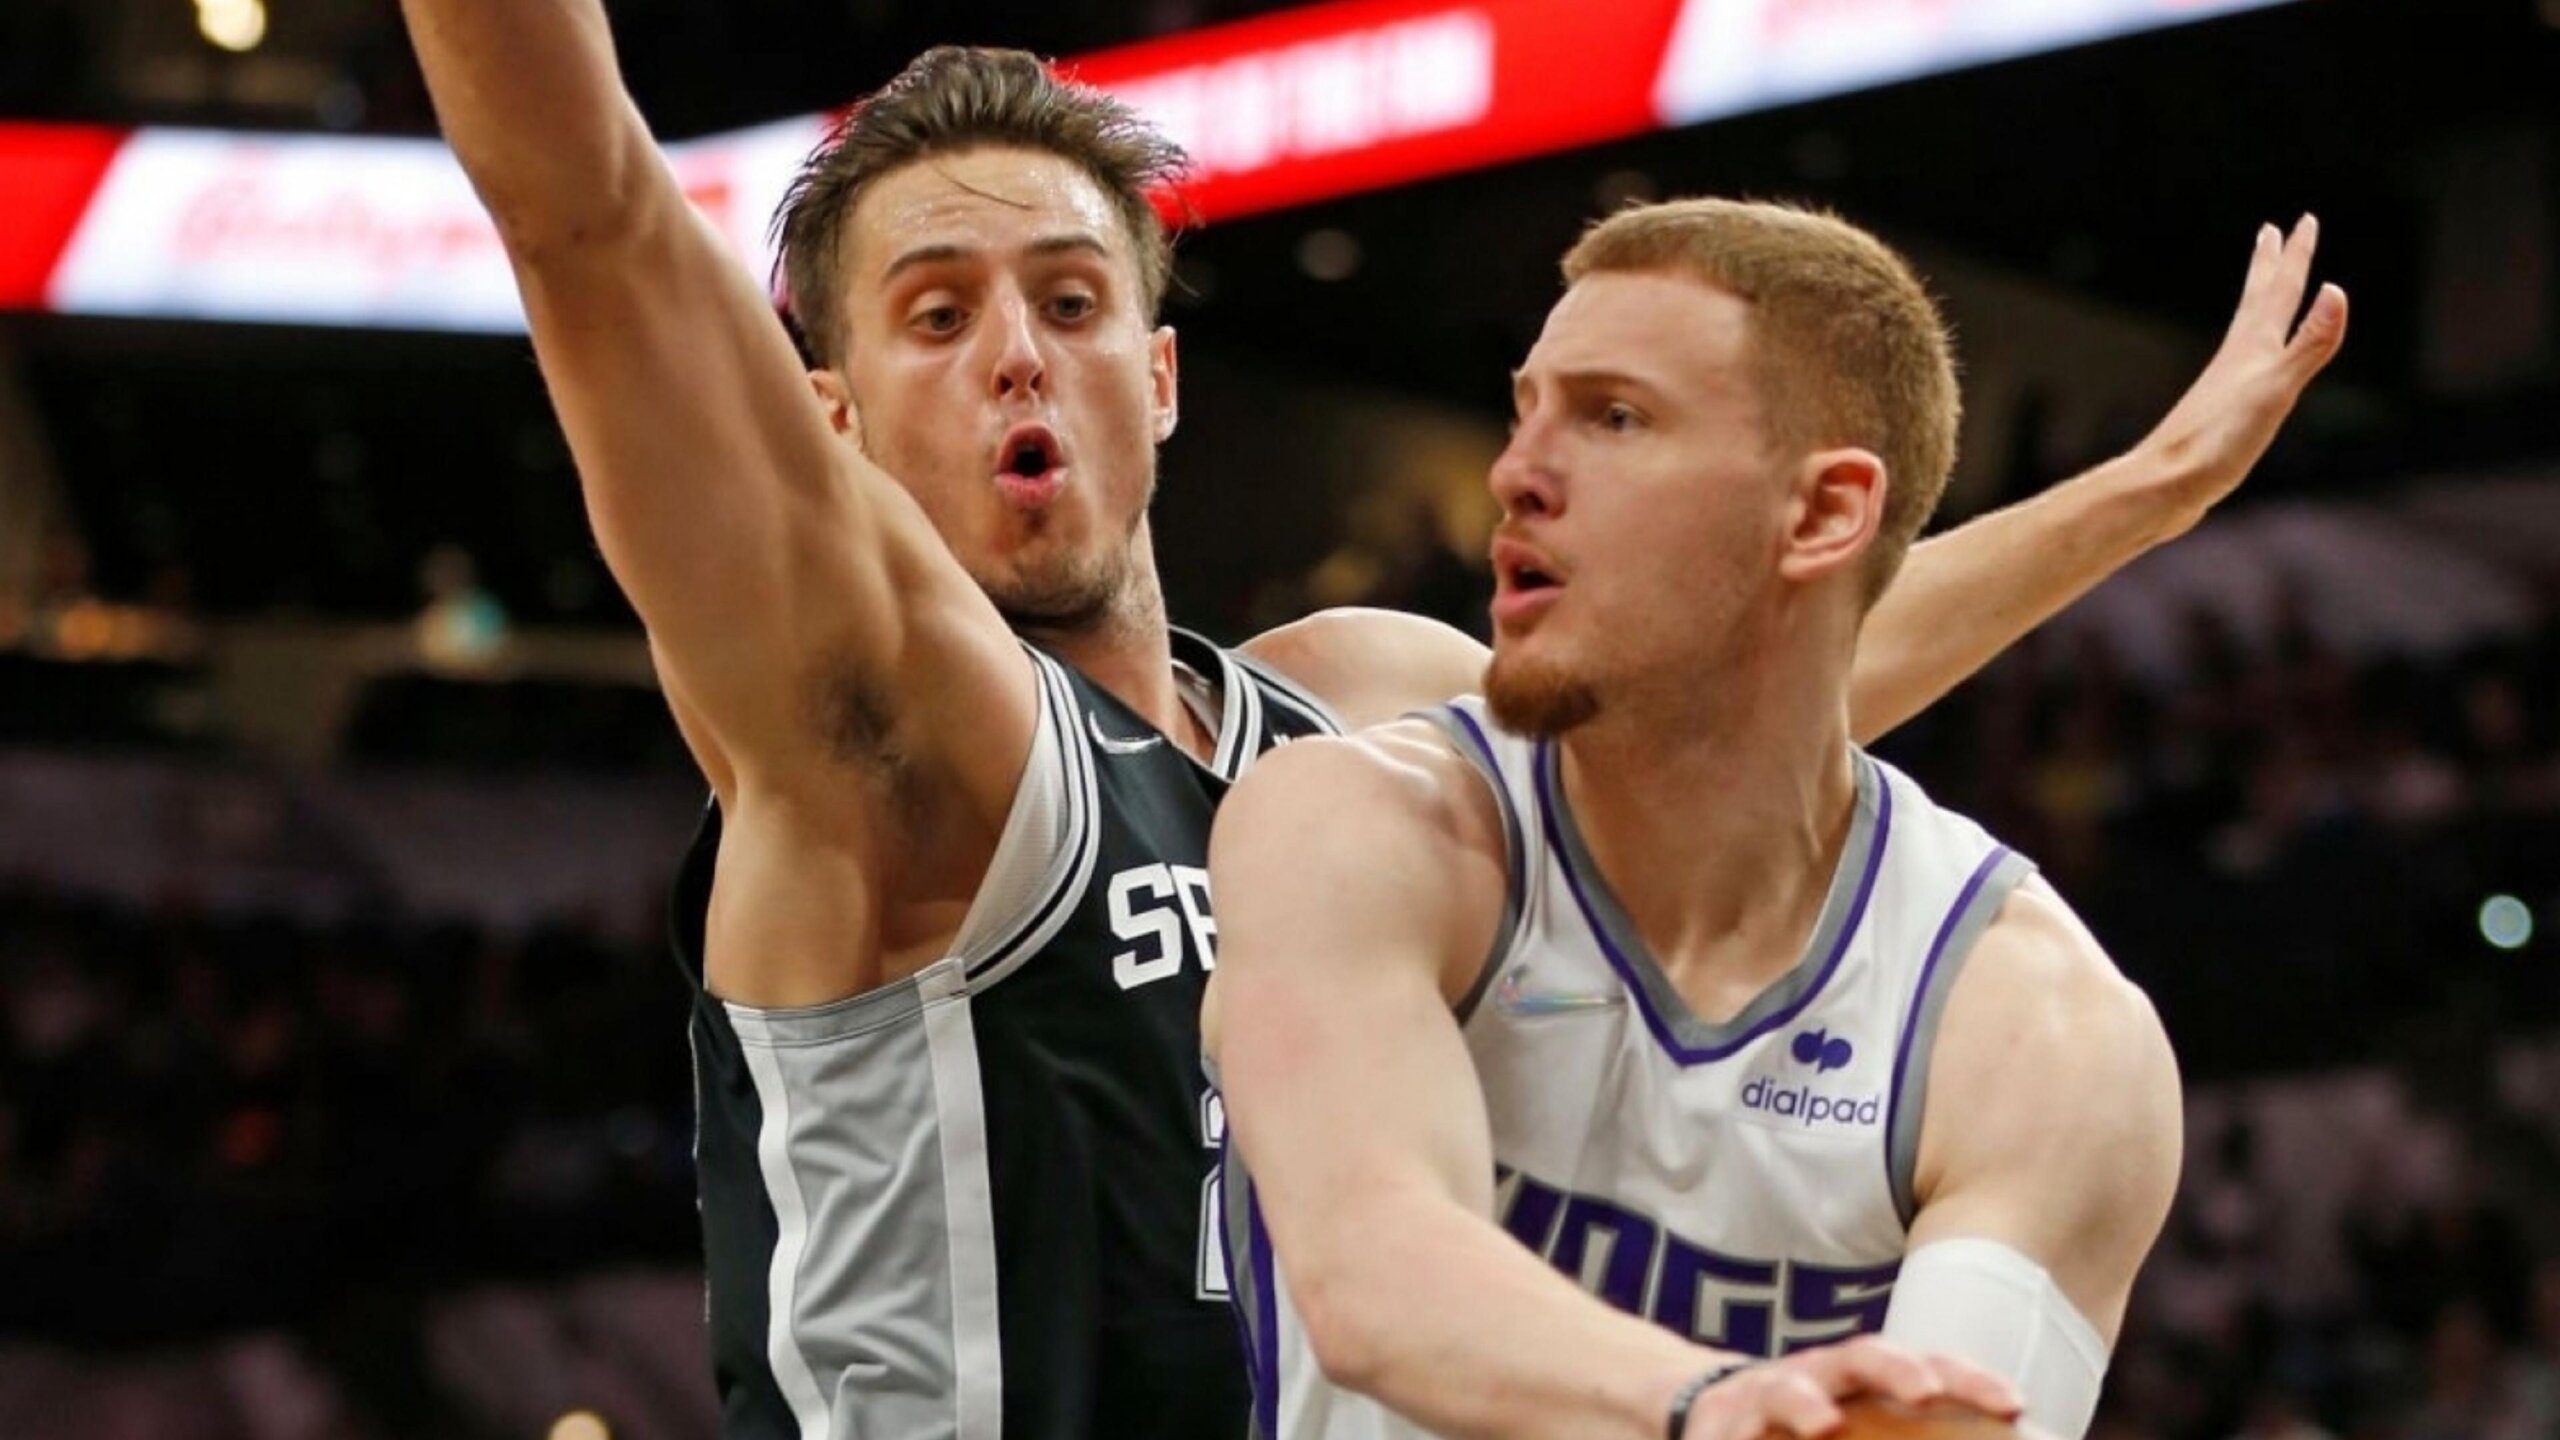 SAN ANTONIO, TX - MARCH 3: Donte DiVencenzo #0 of the Sacramento Kings drives pat Zach Collins #23 of the San Antonio Spursin the second half at AT&T Center on March 3, 2022 in San Antonio, Texas. NOTE TO USER: User expressly acknowledges and agrees that, by downloading and or using this photograph, User is consenting to terms and conditions of the Getty Images License Agreement. (Photo by Ronald Cortes/Getty Images)